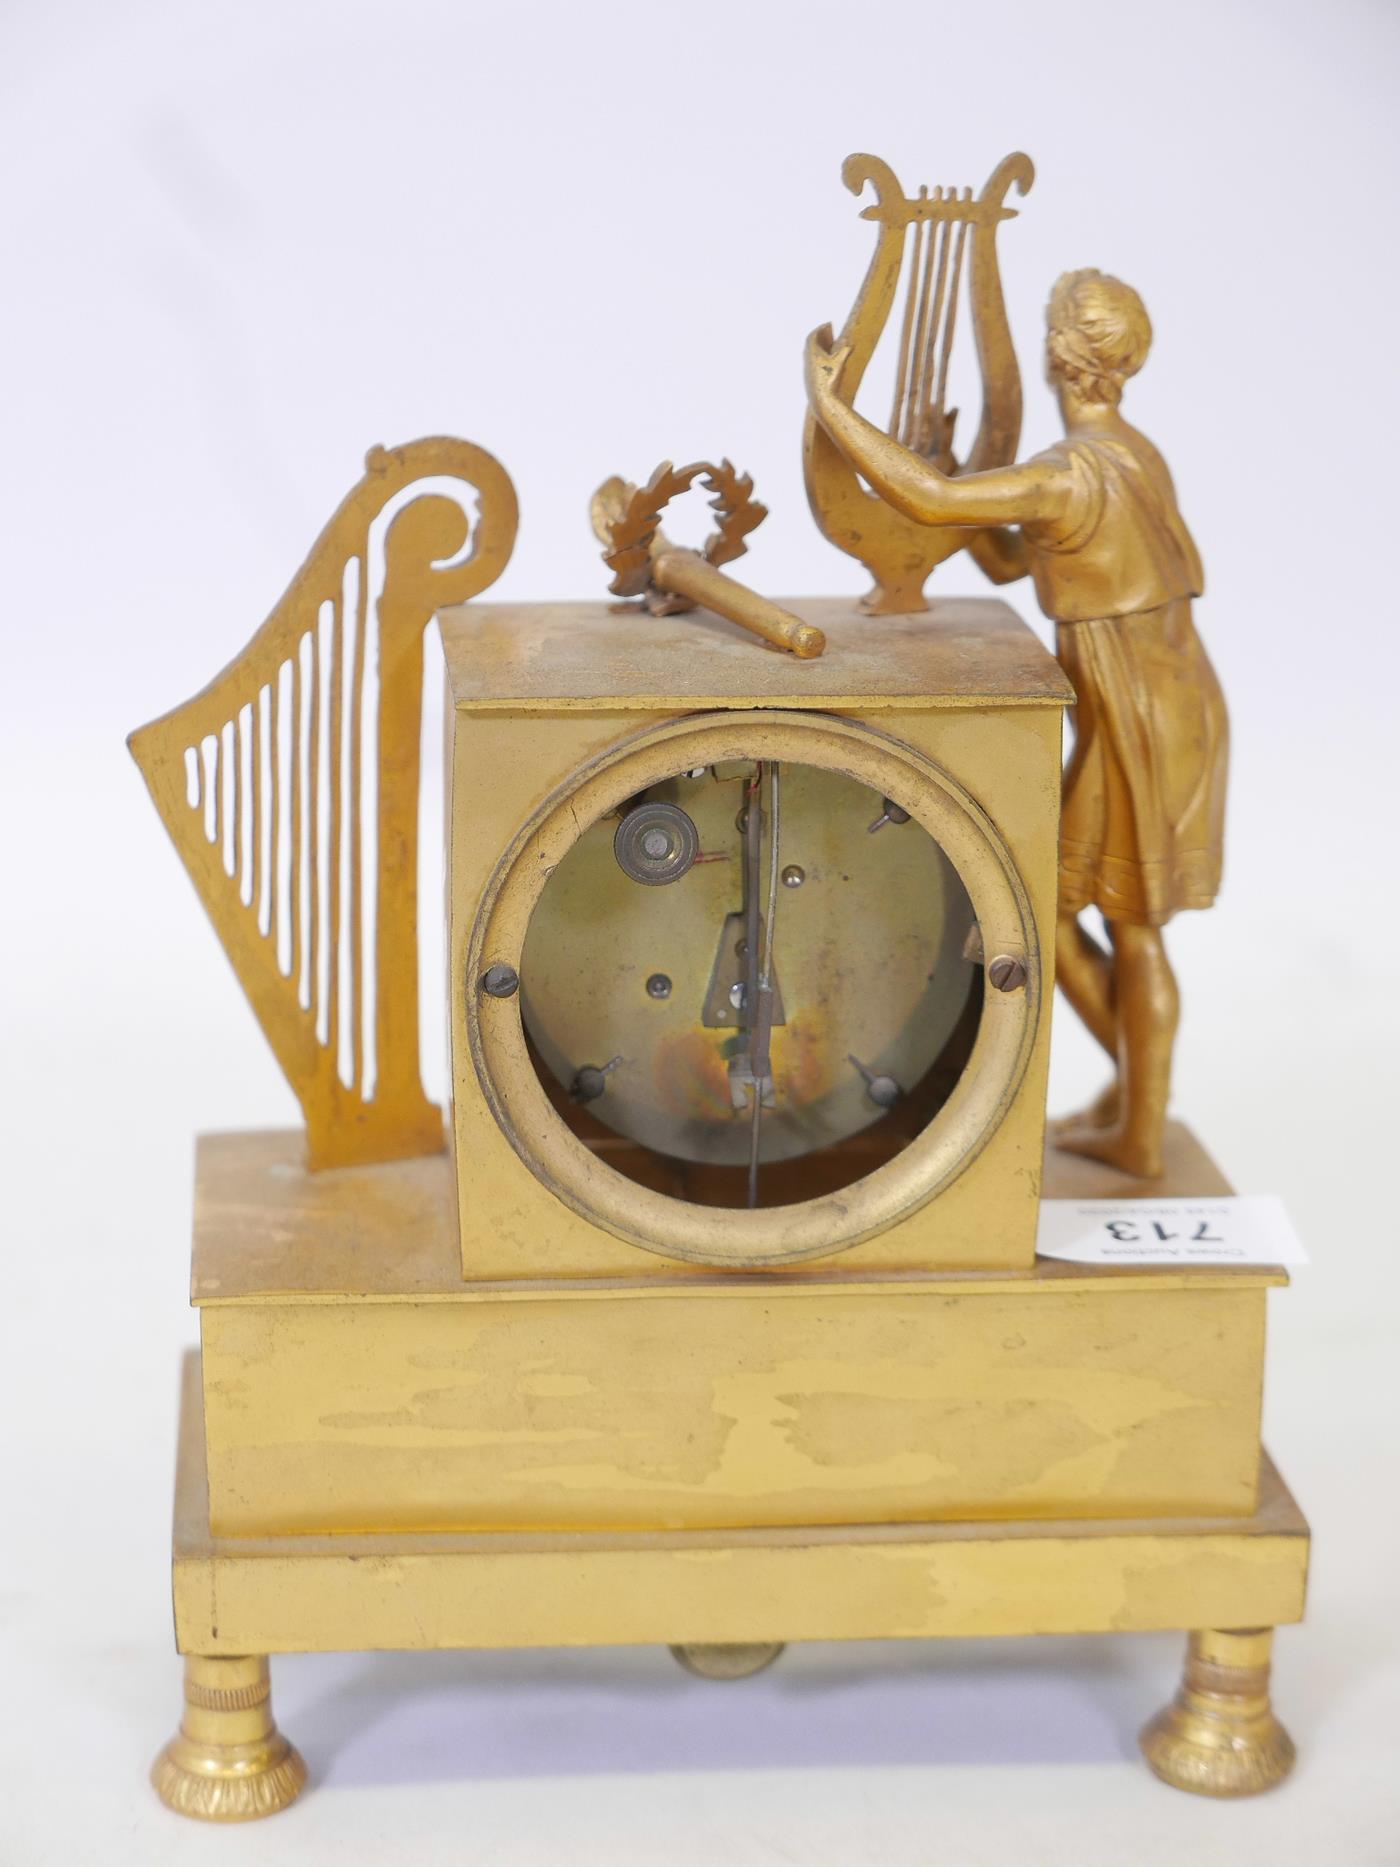 A C19th French empire style ormolu mantel clock, 9" high - Image 3 of 3